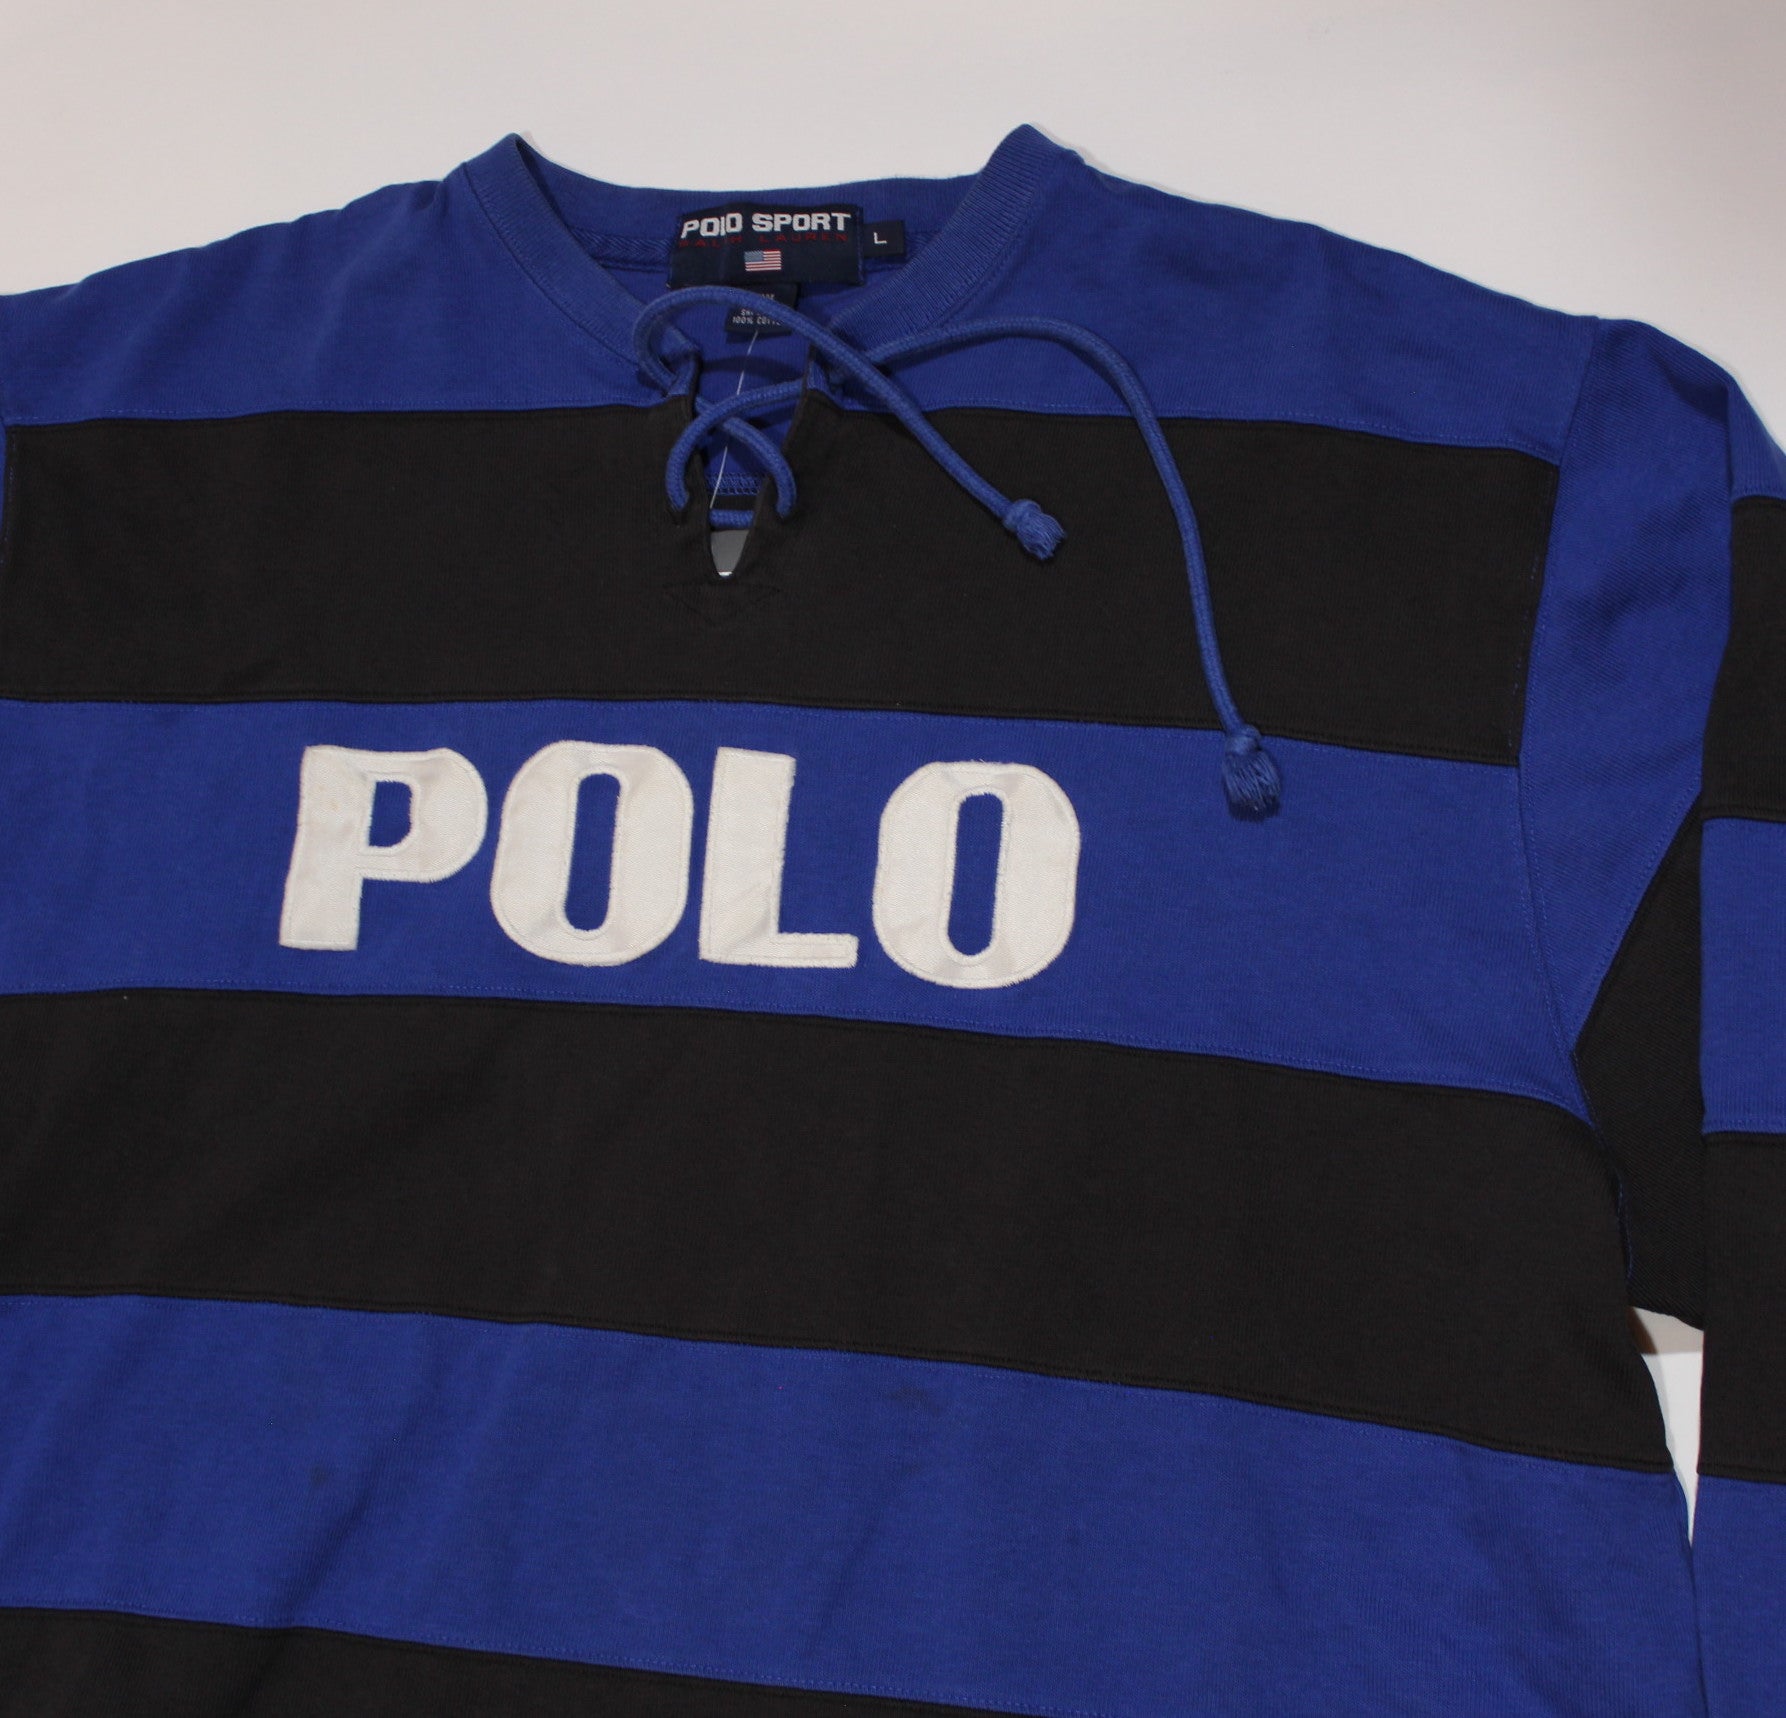 Vintage Polo Sport Rugby at